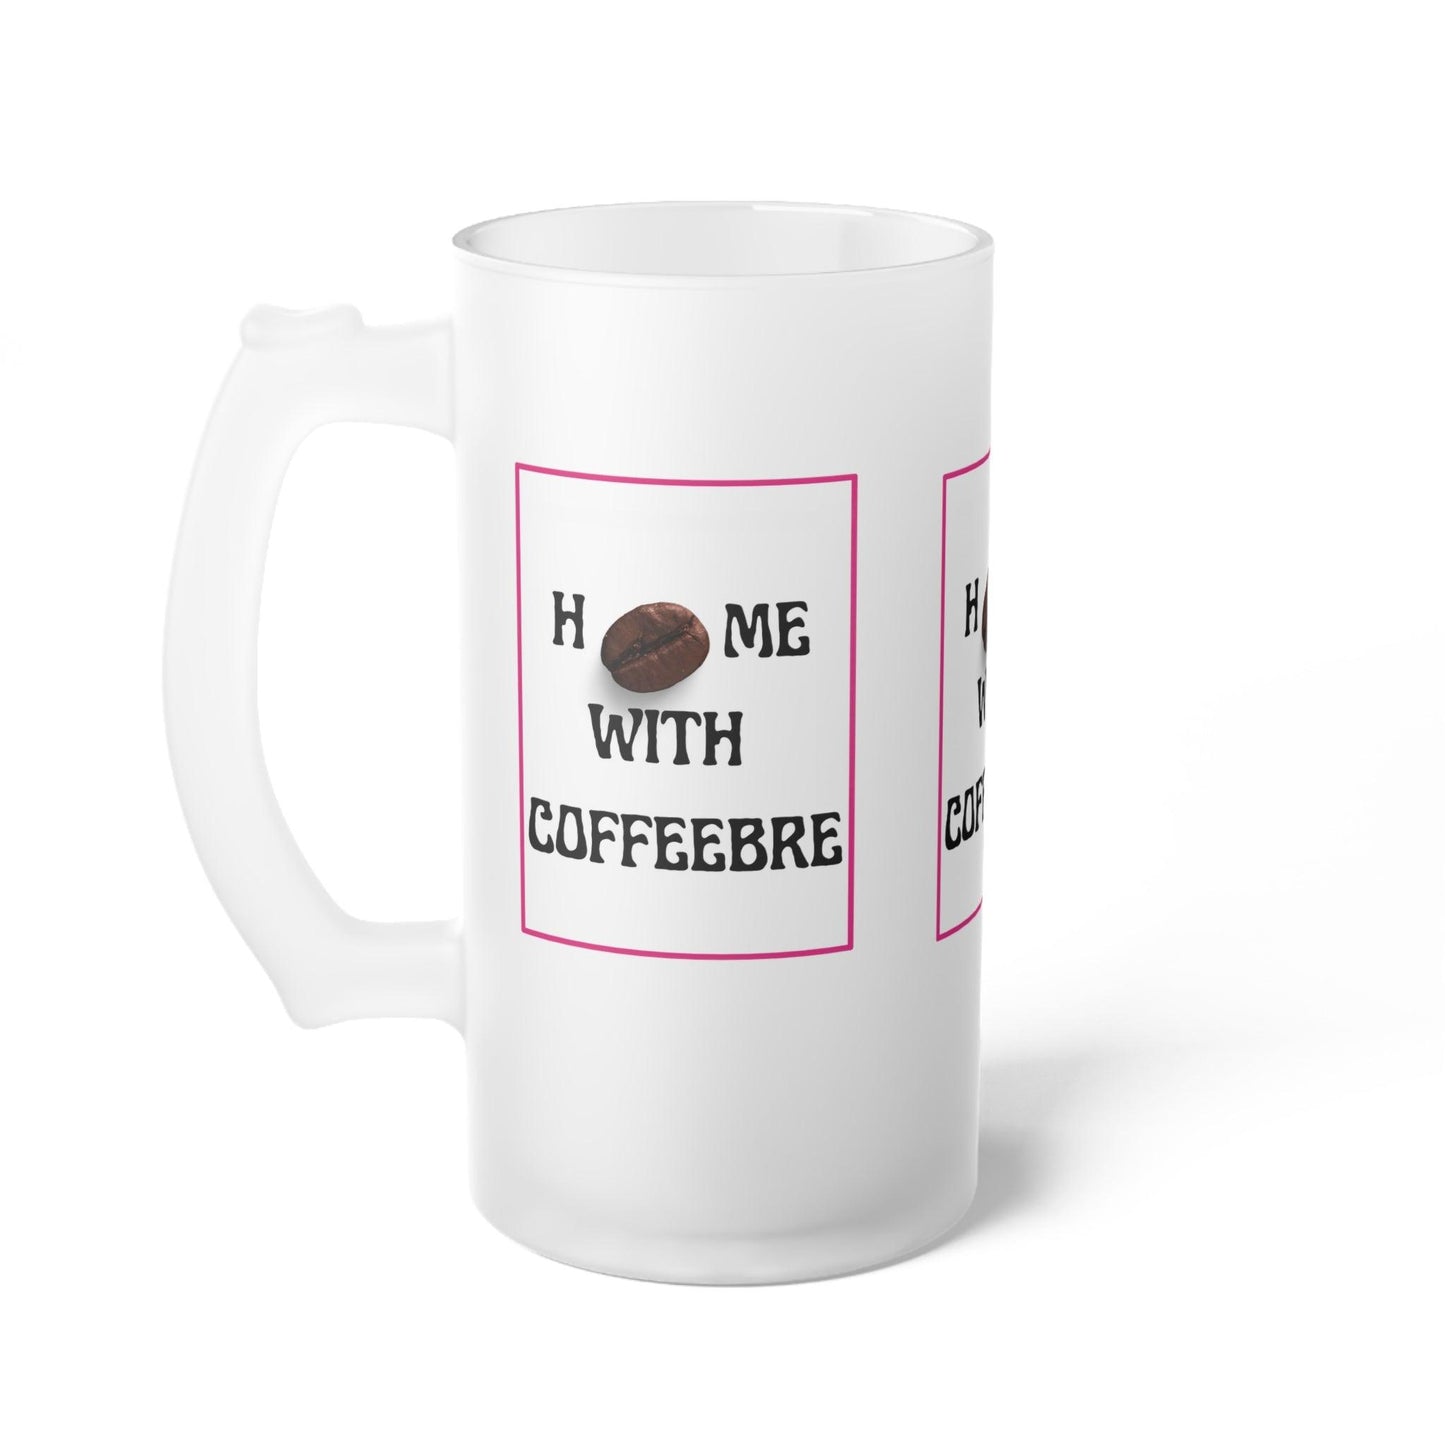 Home With Coffeebre Frosted Glass Latte Mug - COFFEEBRE